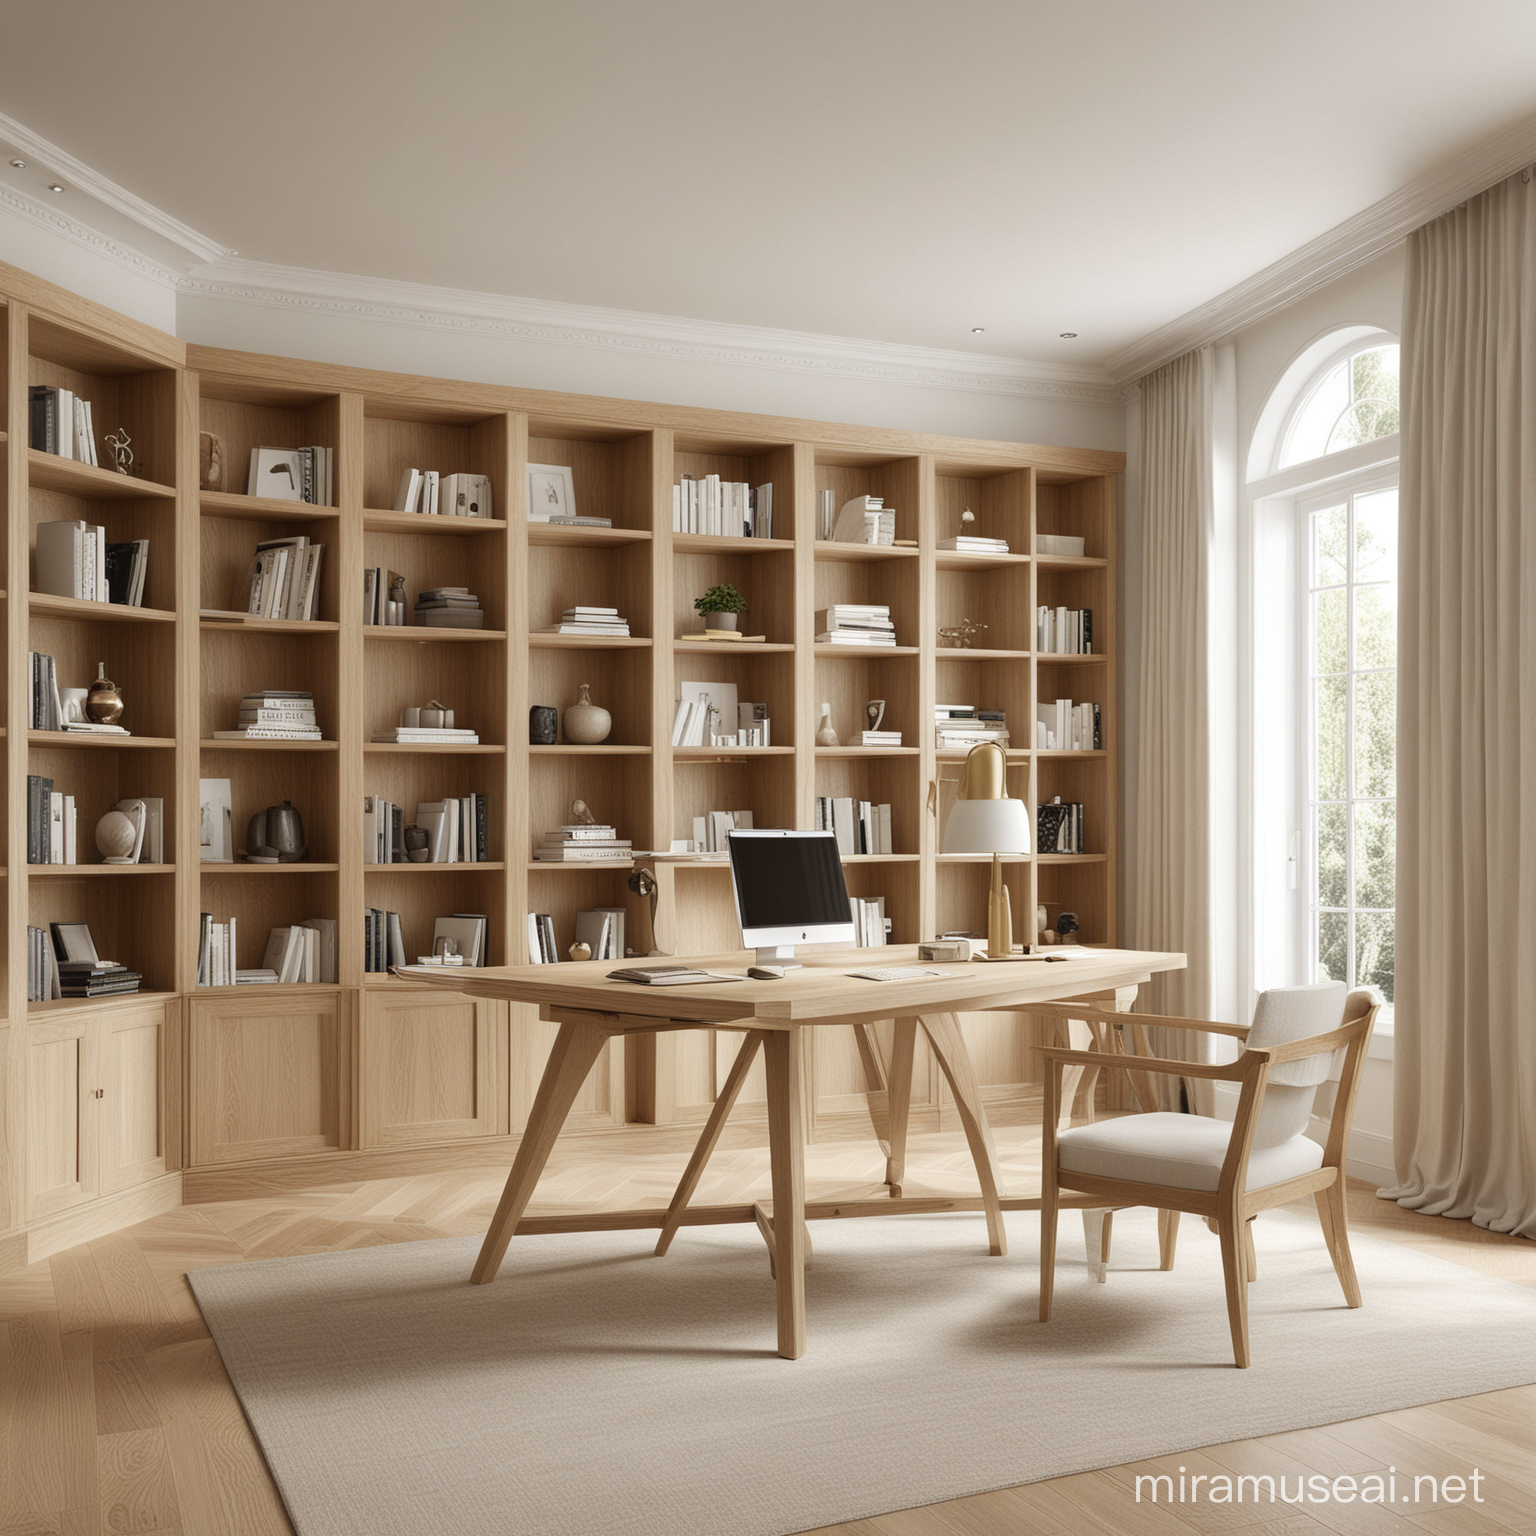 Hyperrealistic Large Home Office and Library with Organic Minimalist Contemporary Design